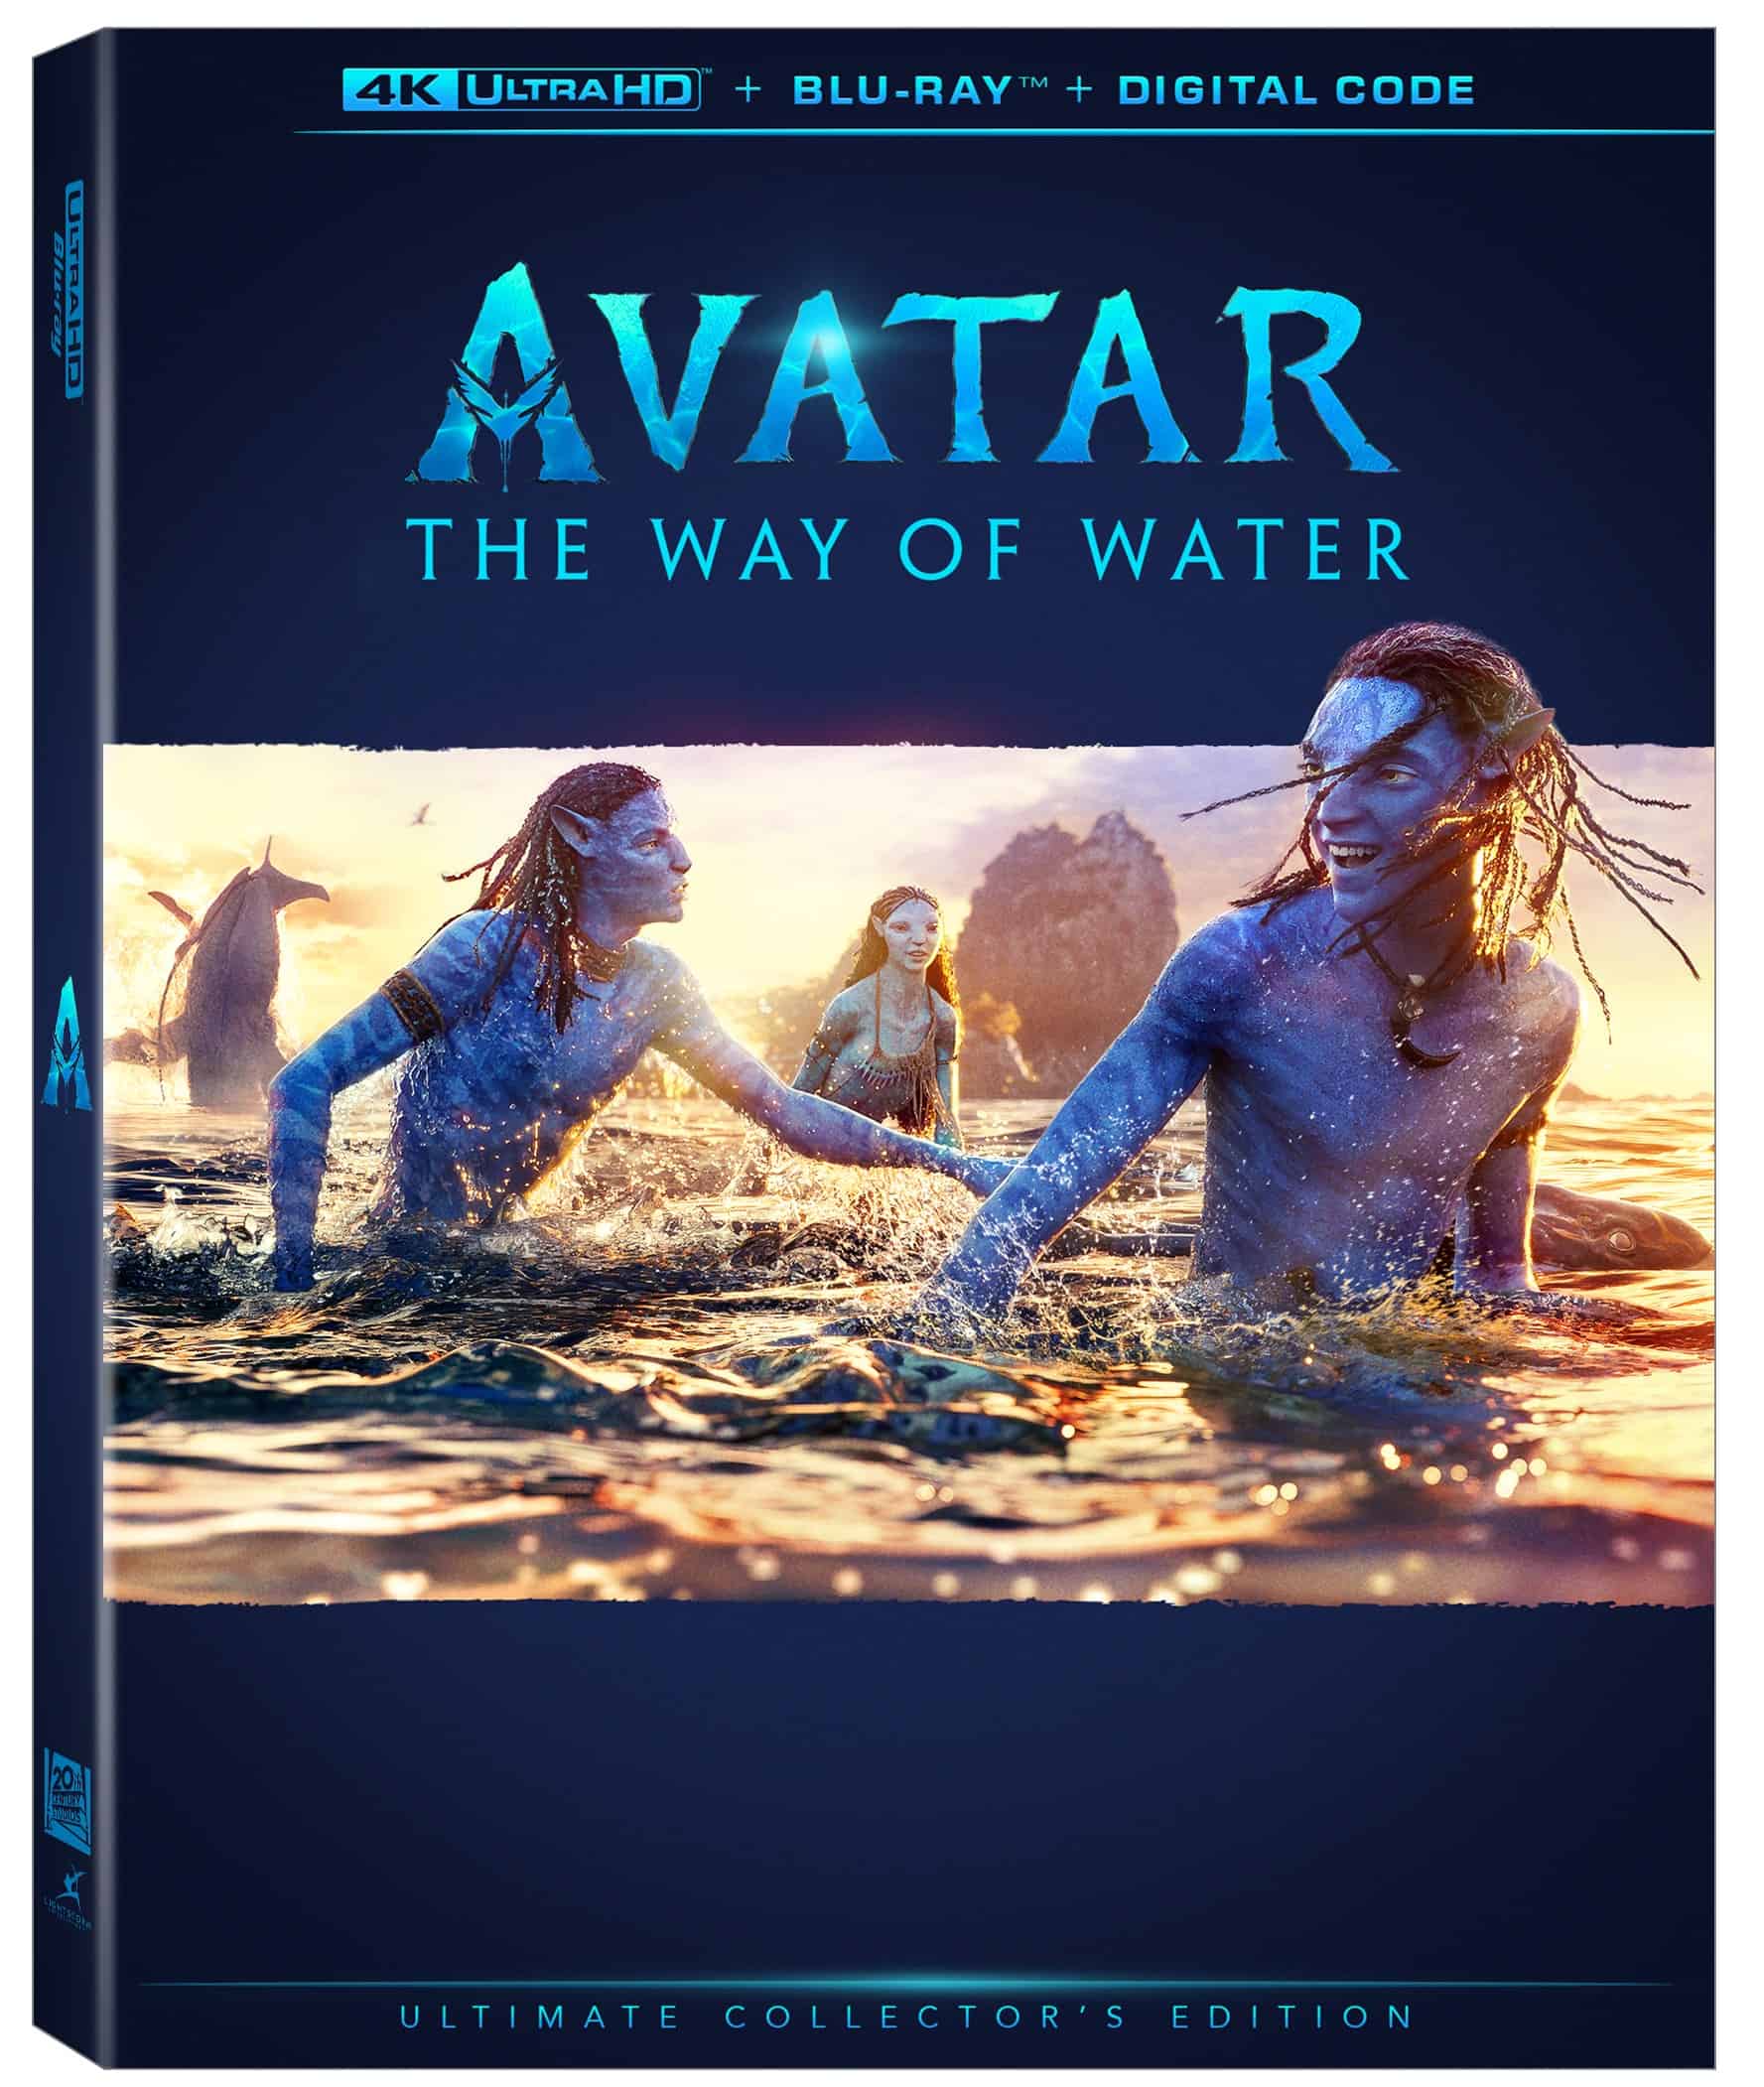 Double Celebration for Avatar Fans: The Arrival of Avatar: The Way of Water and the Ultimate Avatar Experience in 4K UHD 22